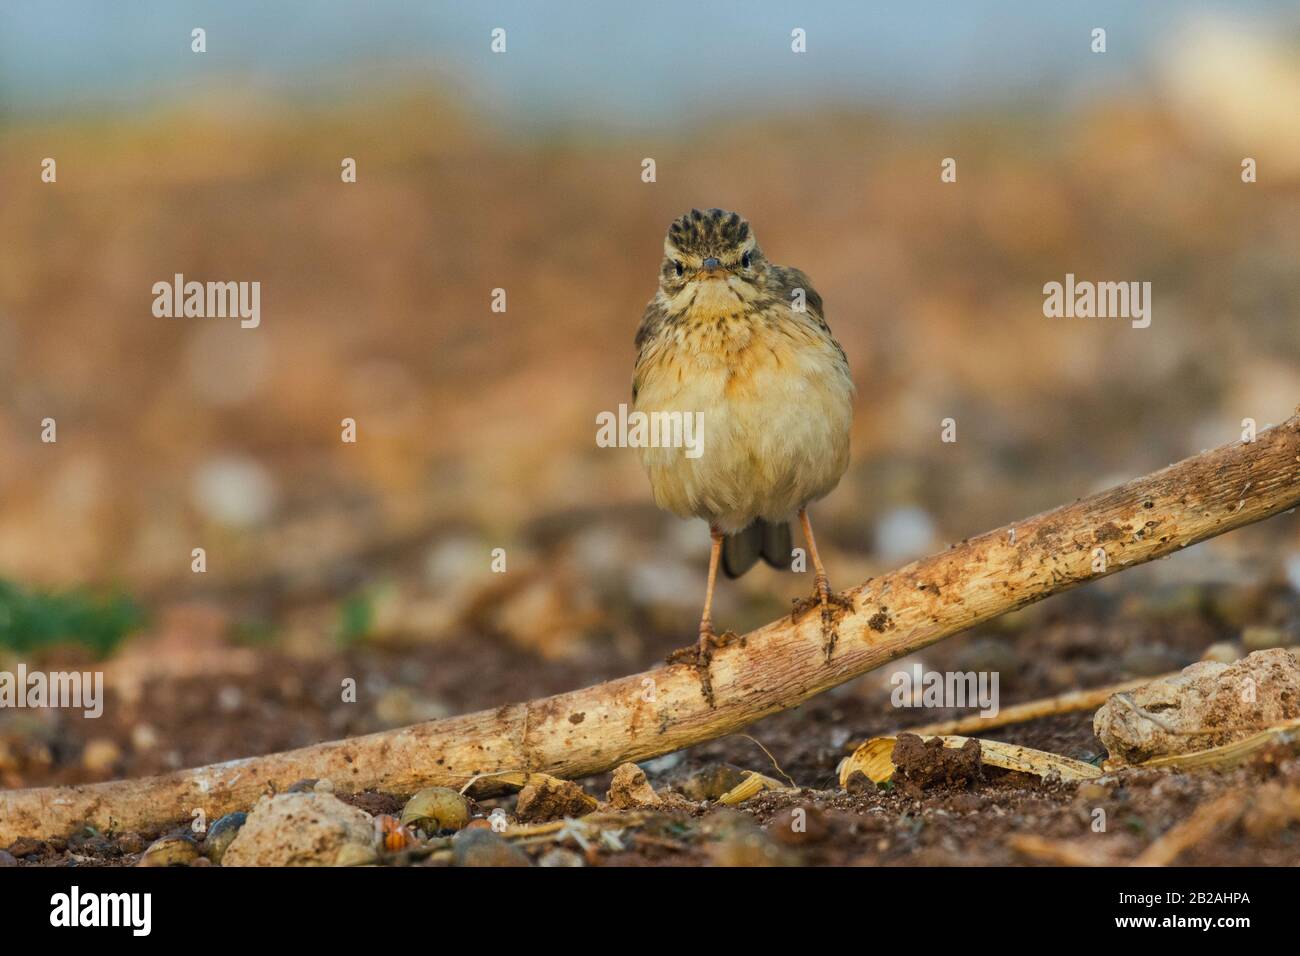 Paddyfield pipit bird perched on the ground Stock Photo